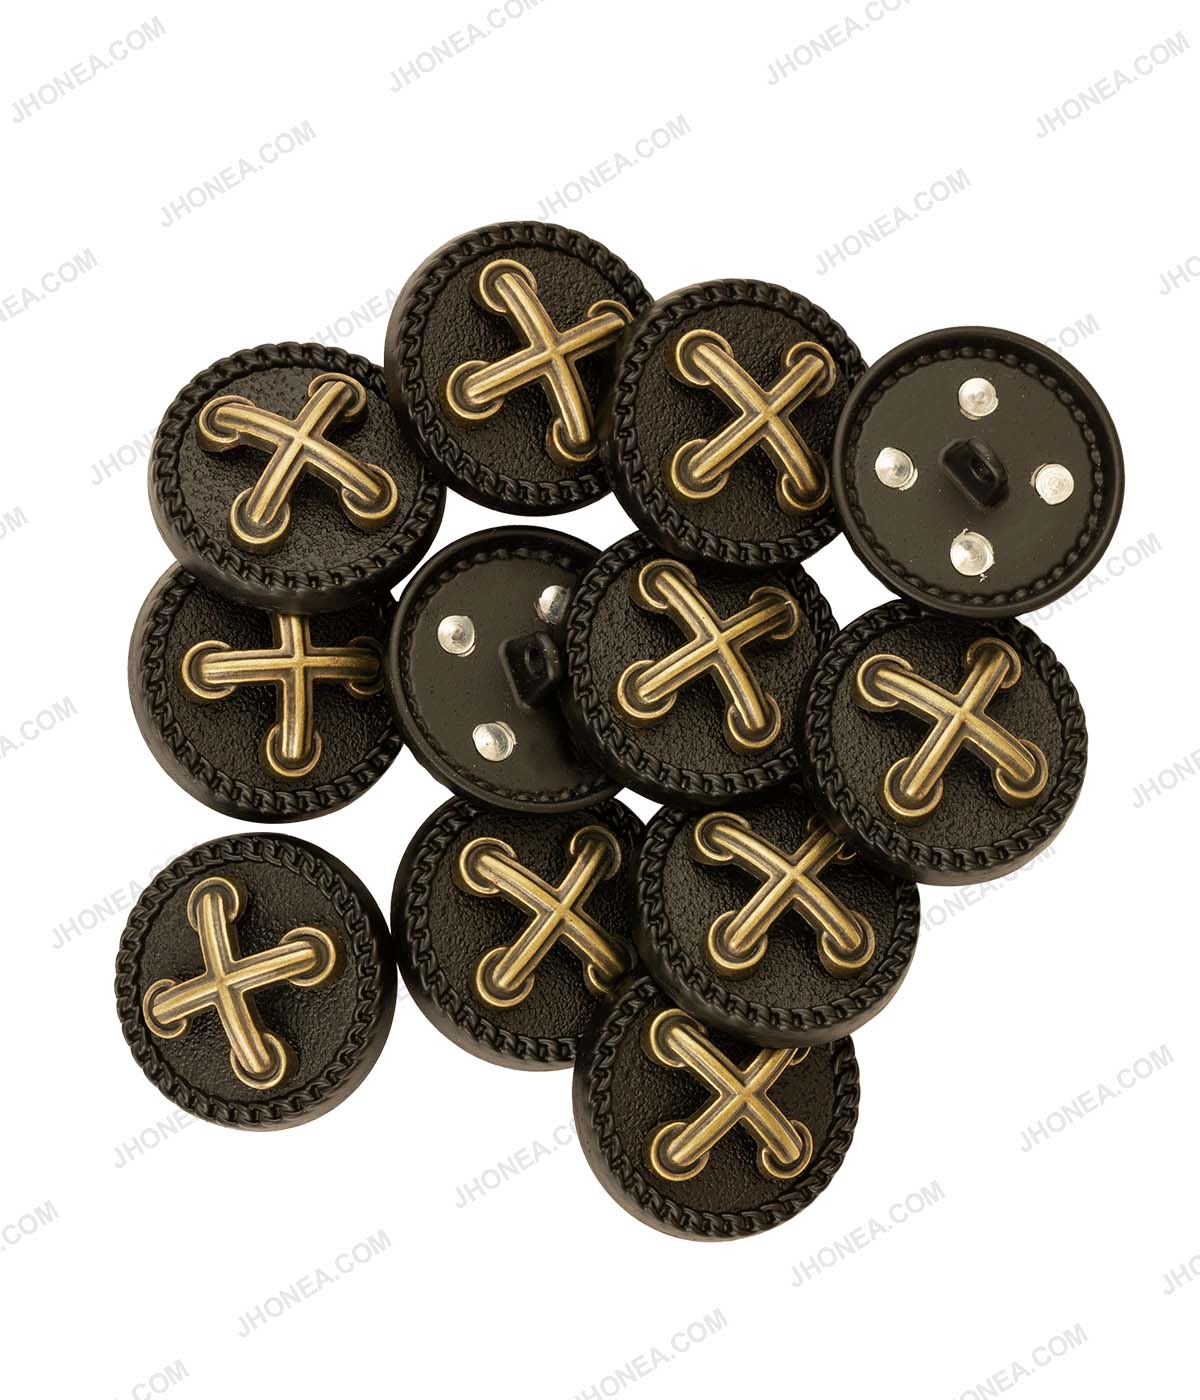 Premium Black with Antique Brass Cross Metal Shank Buttons for Coats